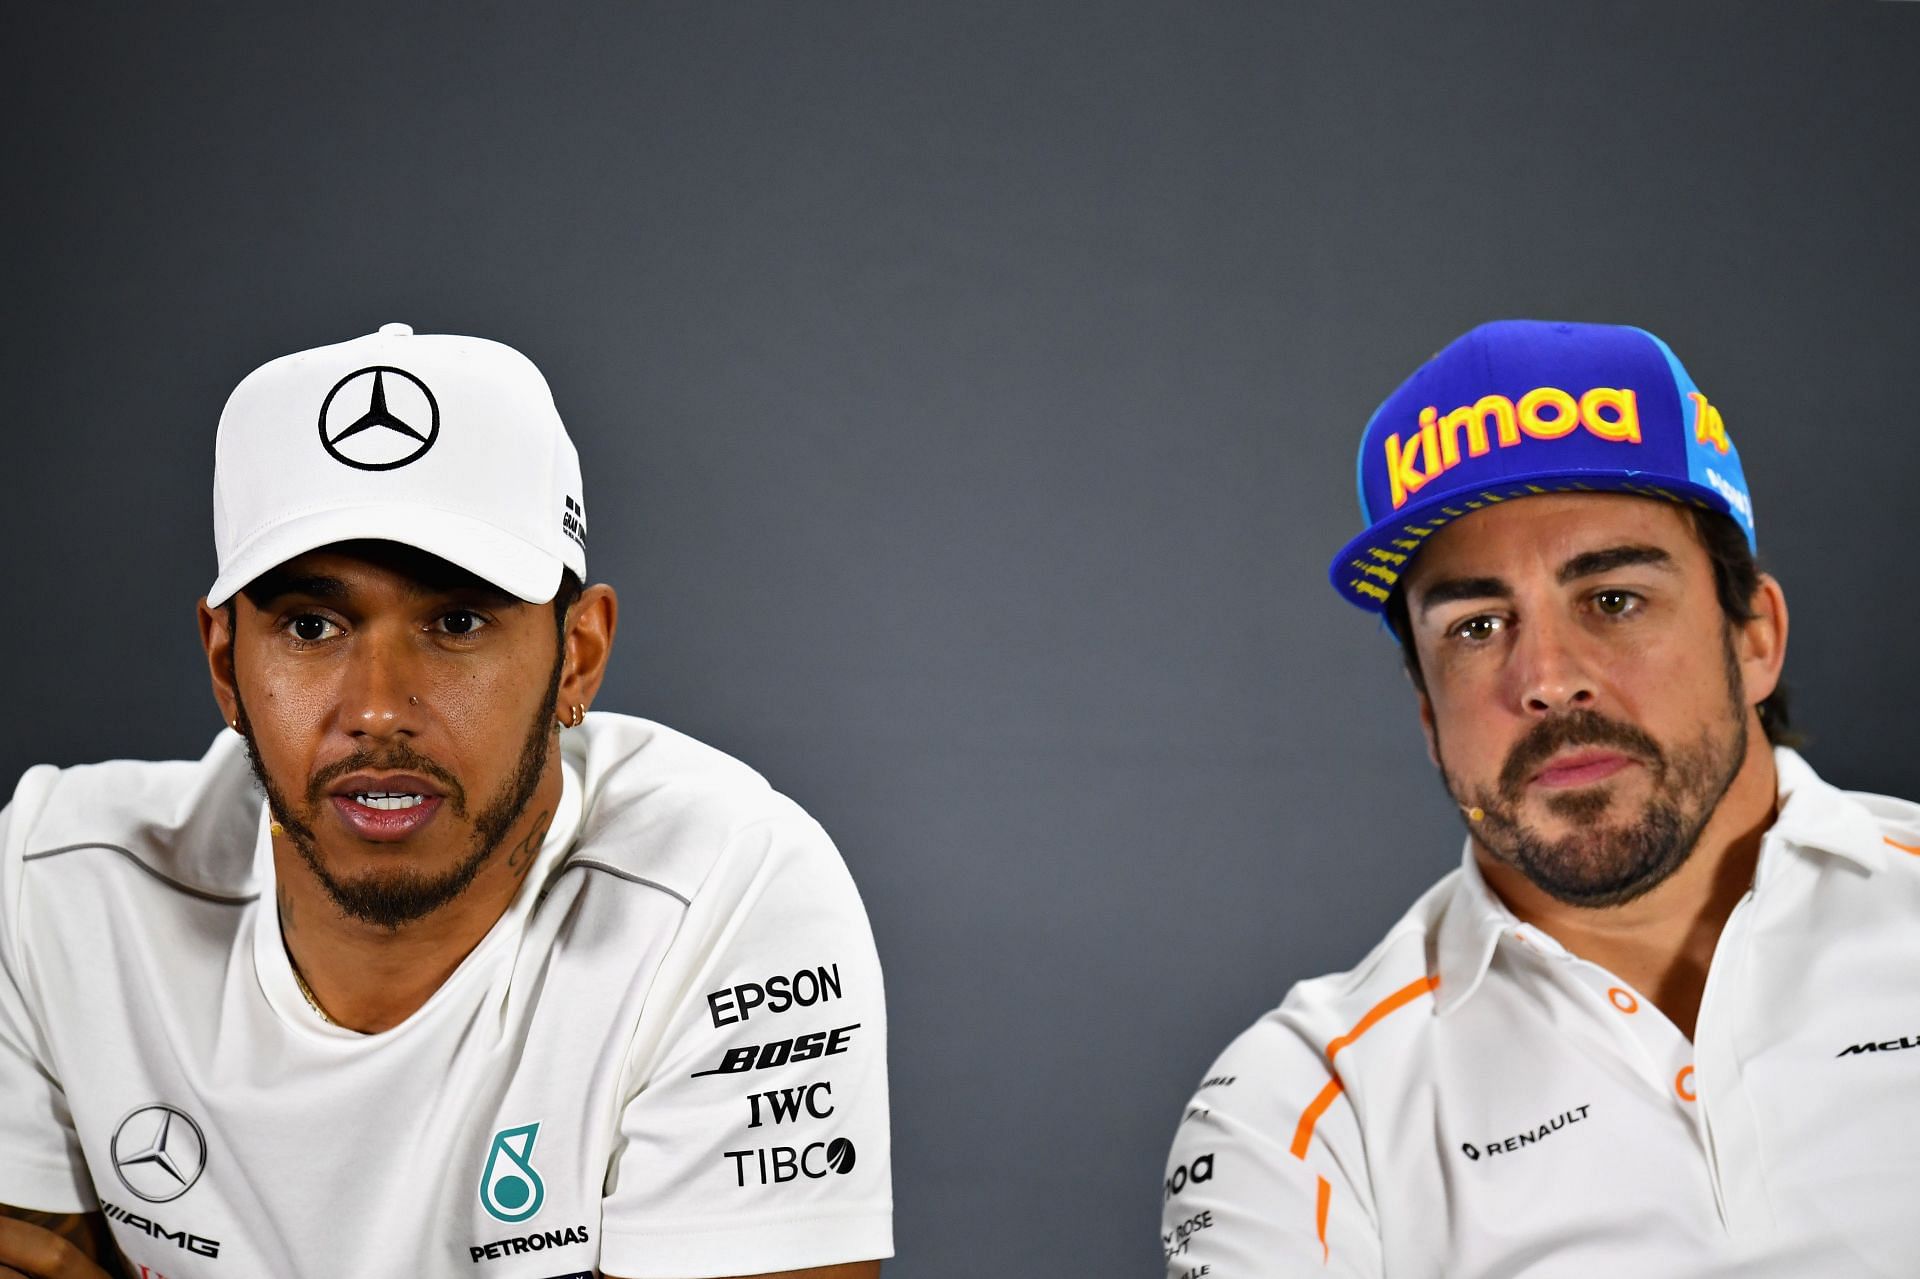 Lewis Hamilton (left) and Fernando Alonso (right) speak to the media in a press conference during the 2018 F1 Abu Dhabi GP weekend (Photo by Clive Mason/Getty Images)